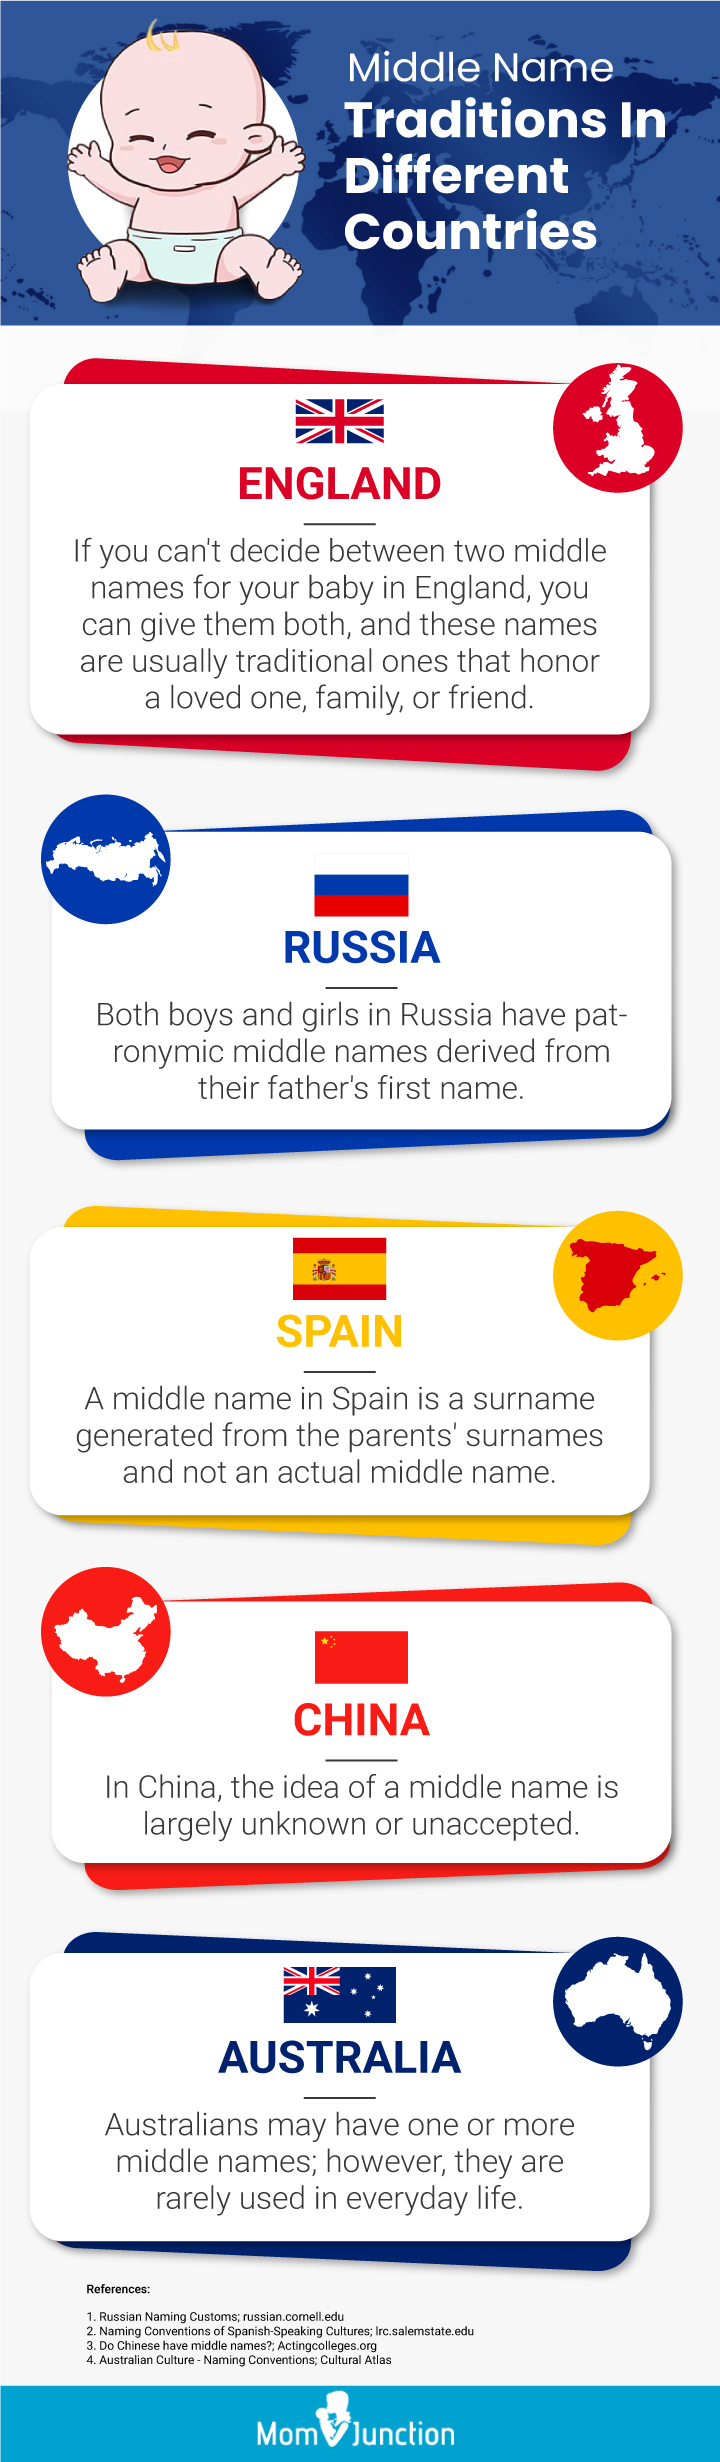 middle name traditions in different countries (infographic)